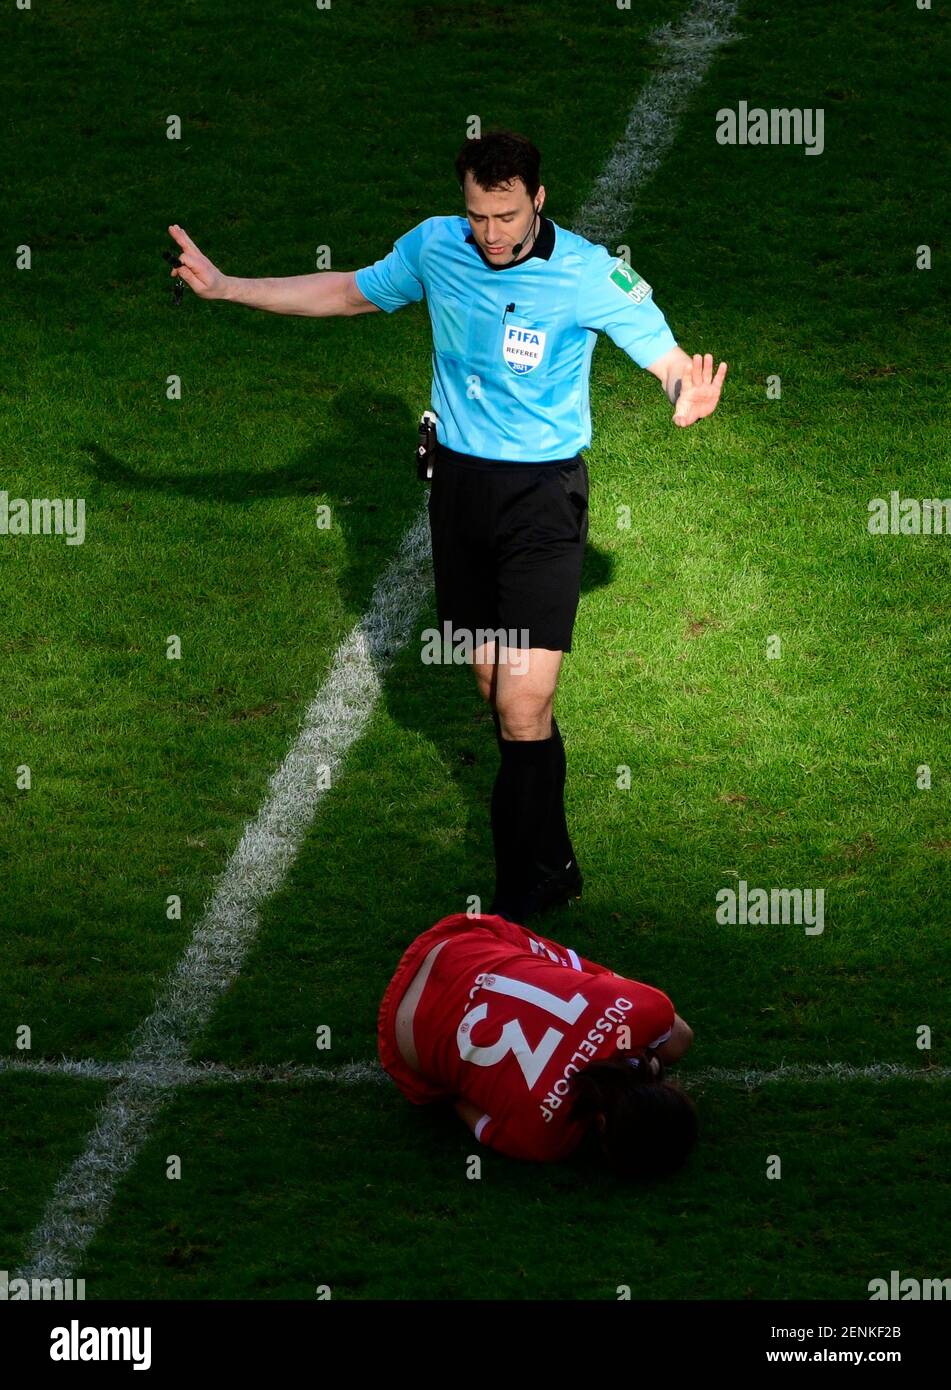 Merkur Spielarena Duesseldorf Germany  21.2.2021, Football:  2nd Bundesliga Season 2020/21, matchday 22, Fortuna Duesseldorf (F95, red) vs Hannover 96 (H96, green)  - Referee Felix Zwayer takes care of Adam Bodzek (F95)         DFL REGULATIONS PROHIBIT ANY USE OF PHOTOGRAPHS AS IMAGE SEQUENCES AND OR QUASI VIDEO Stock Photo